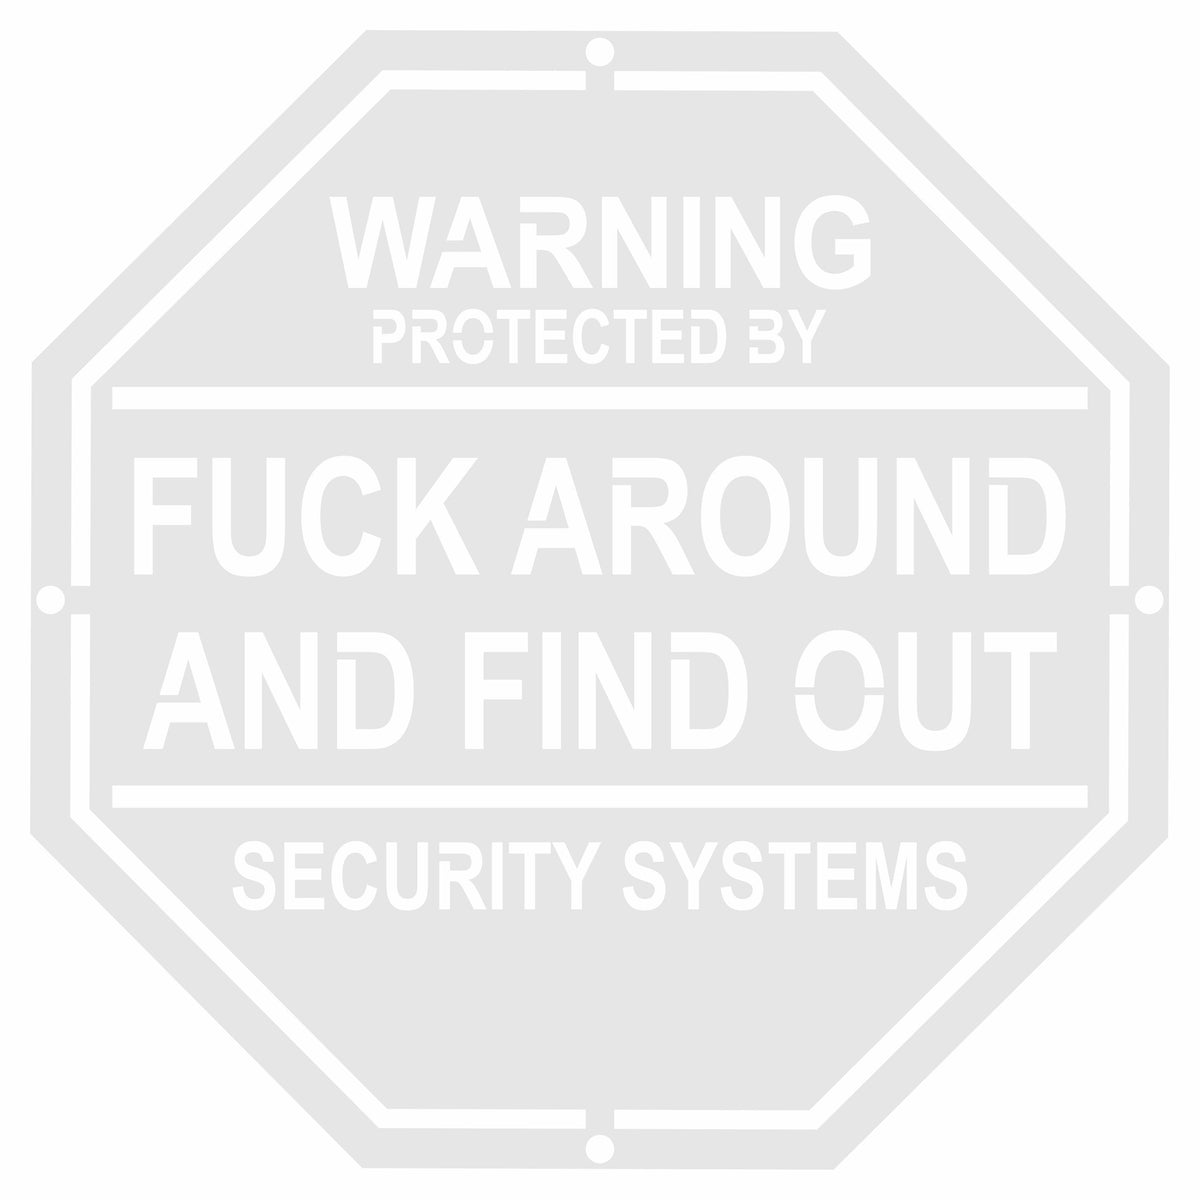 Protected By Fuck Around & Find Out - Metal - Free Shipping